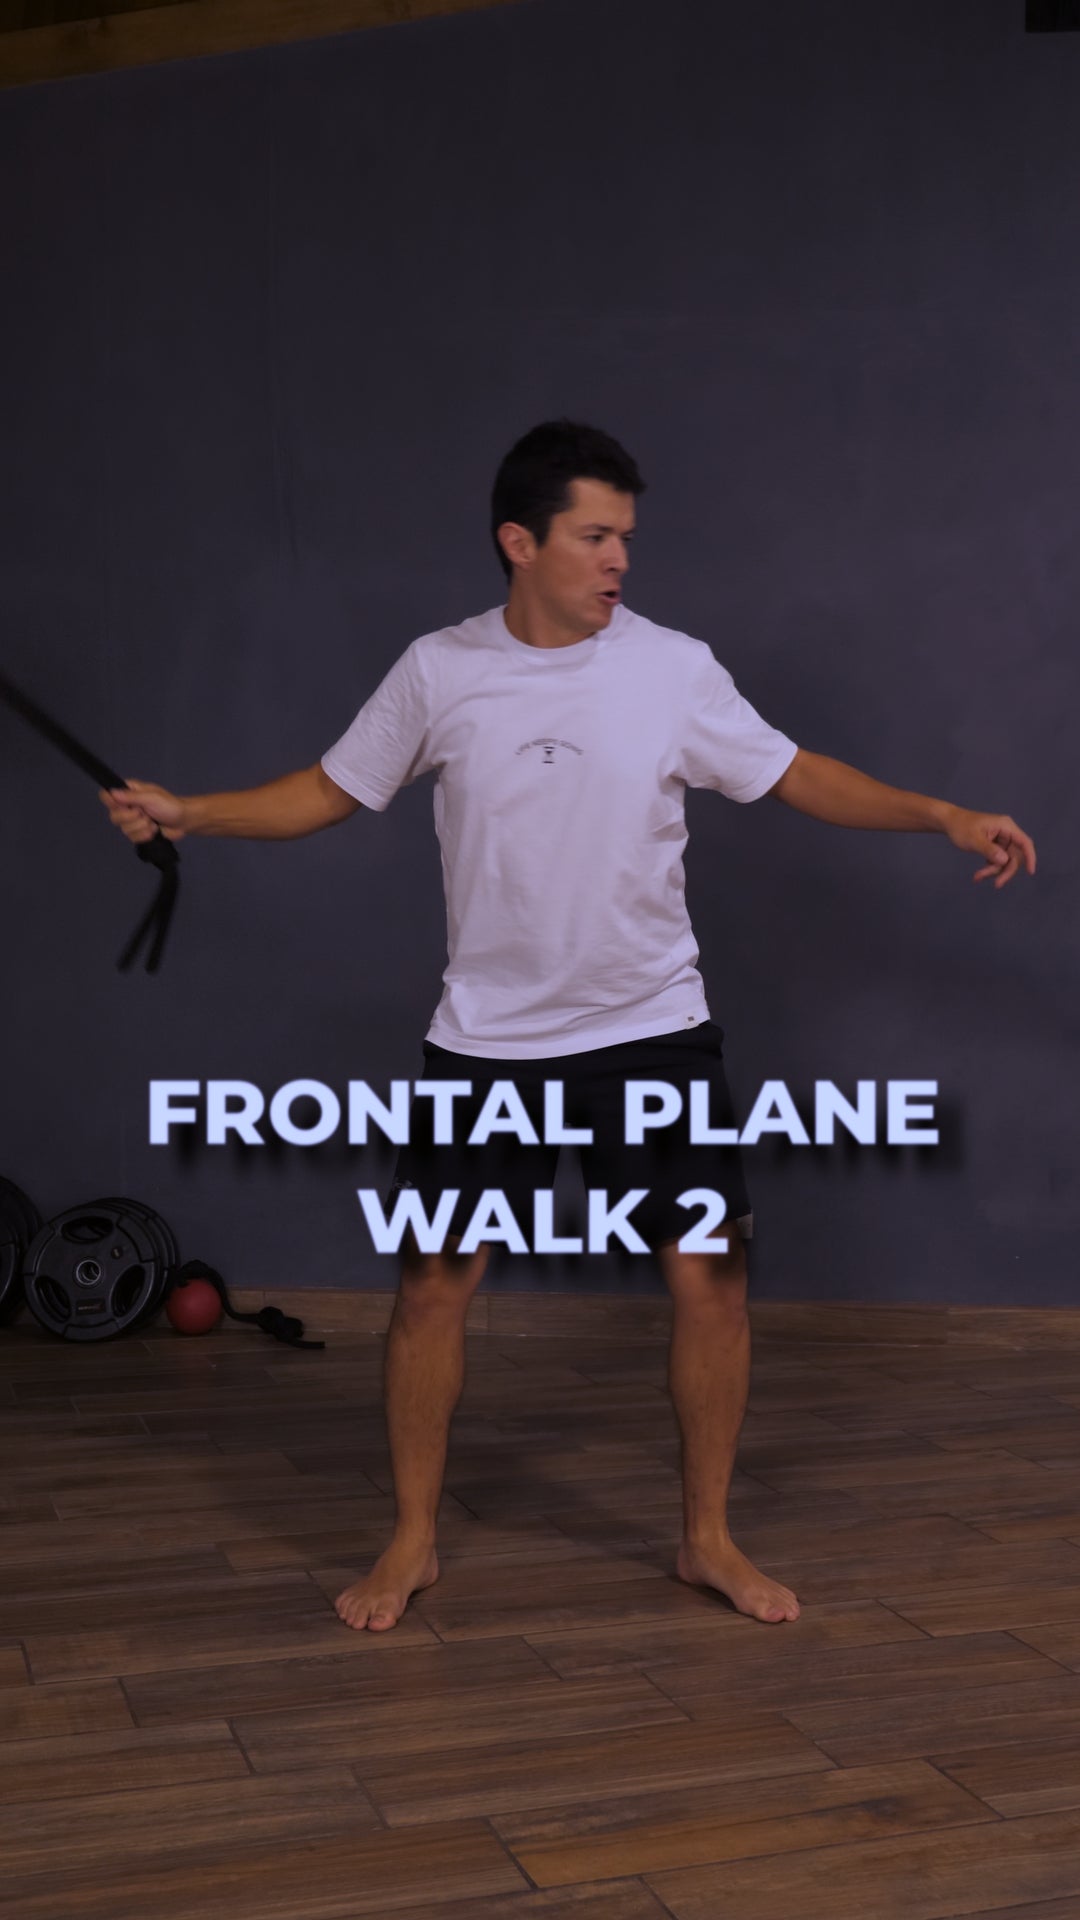 HOW TO DO A FRONTAL PLANE WALK 2